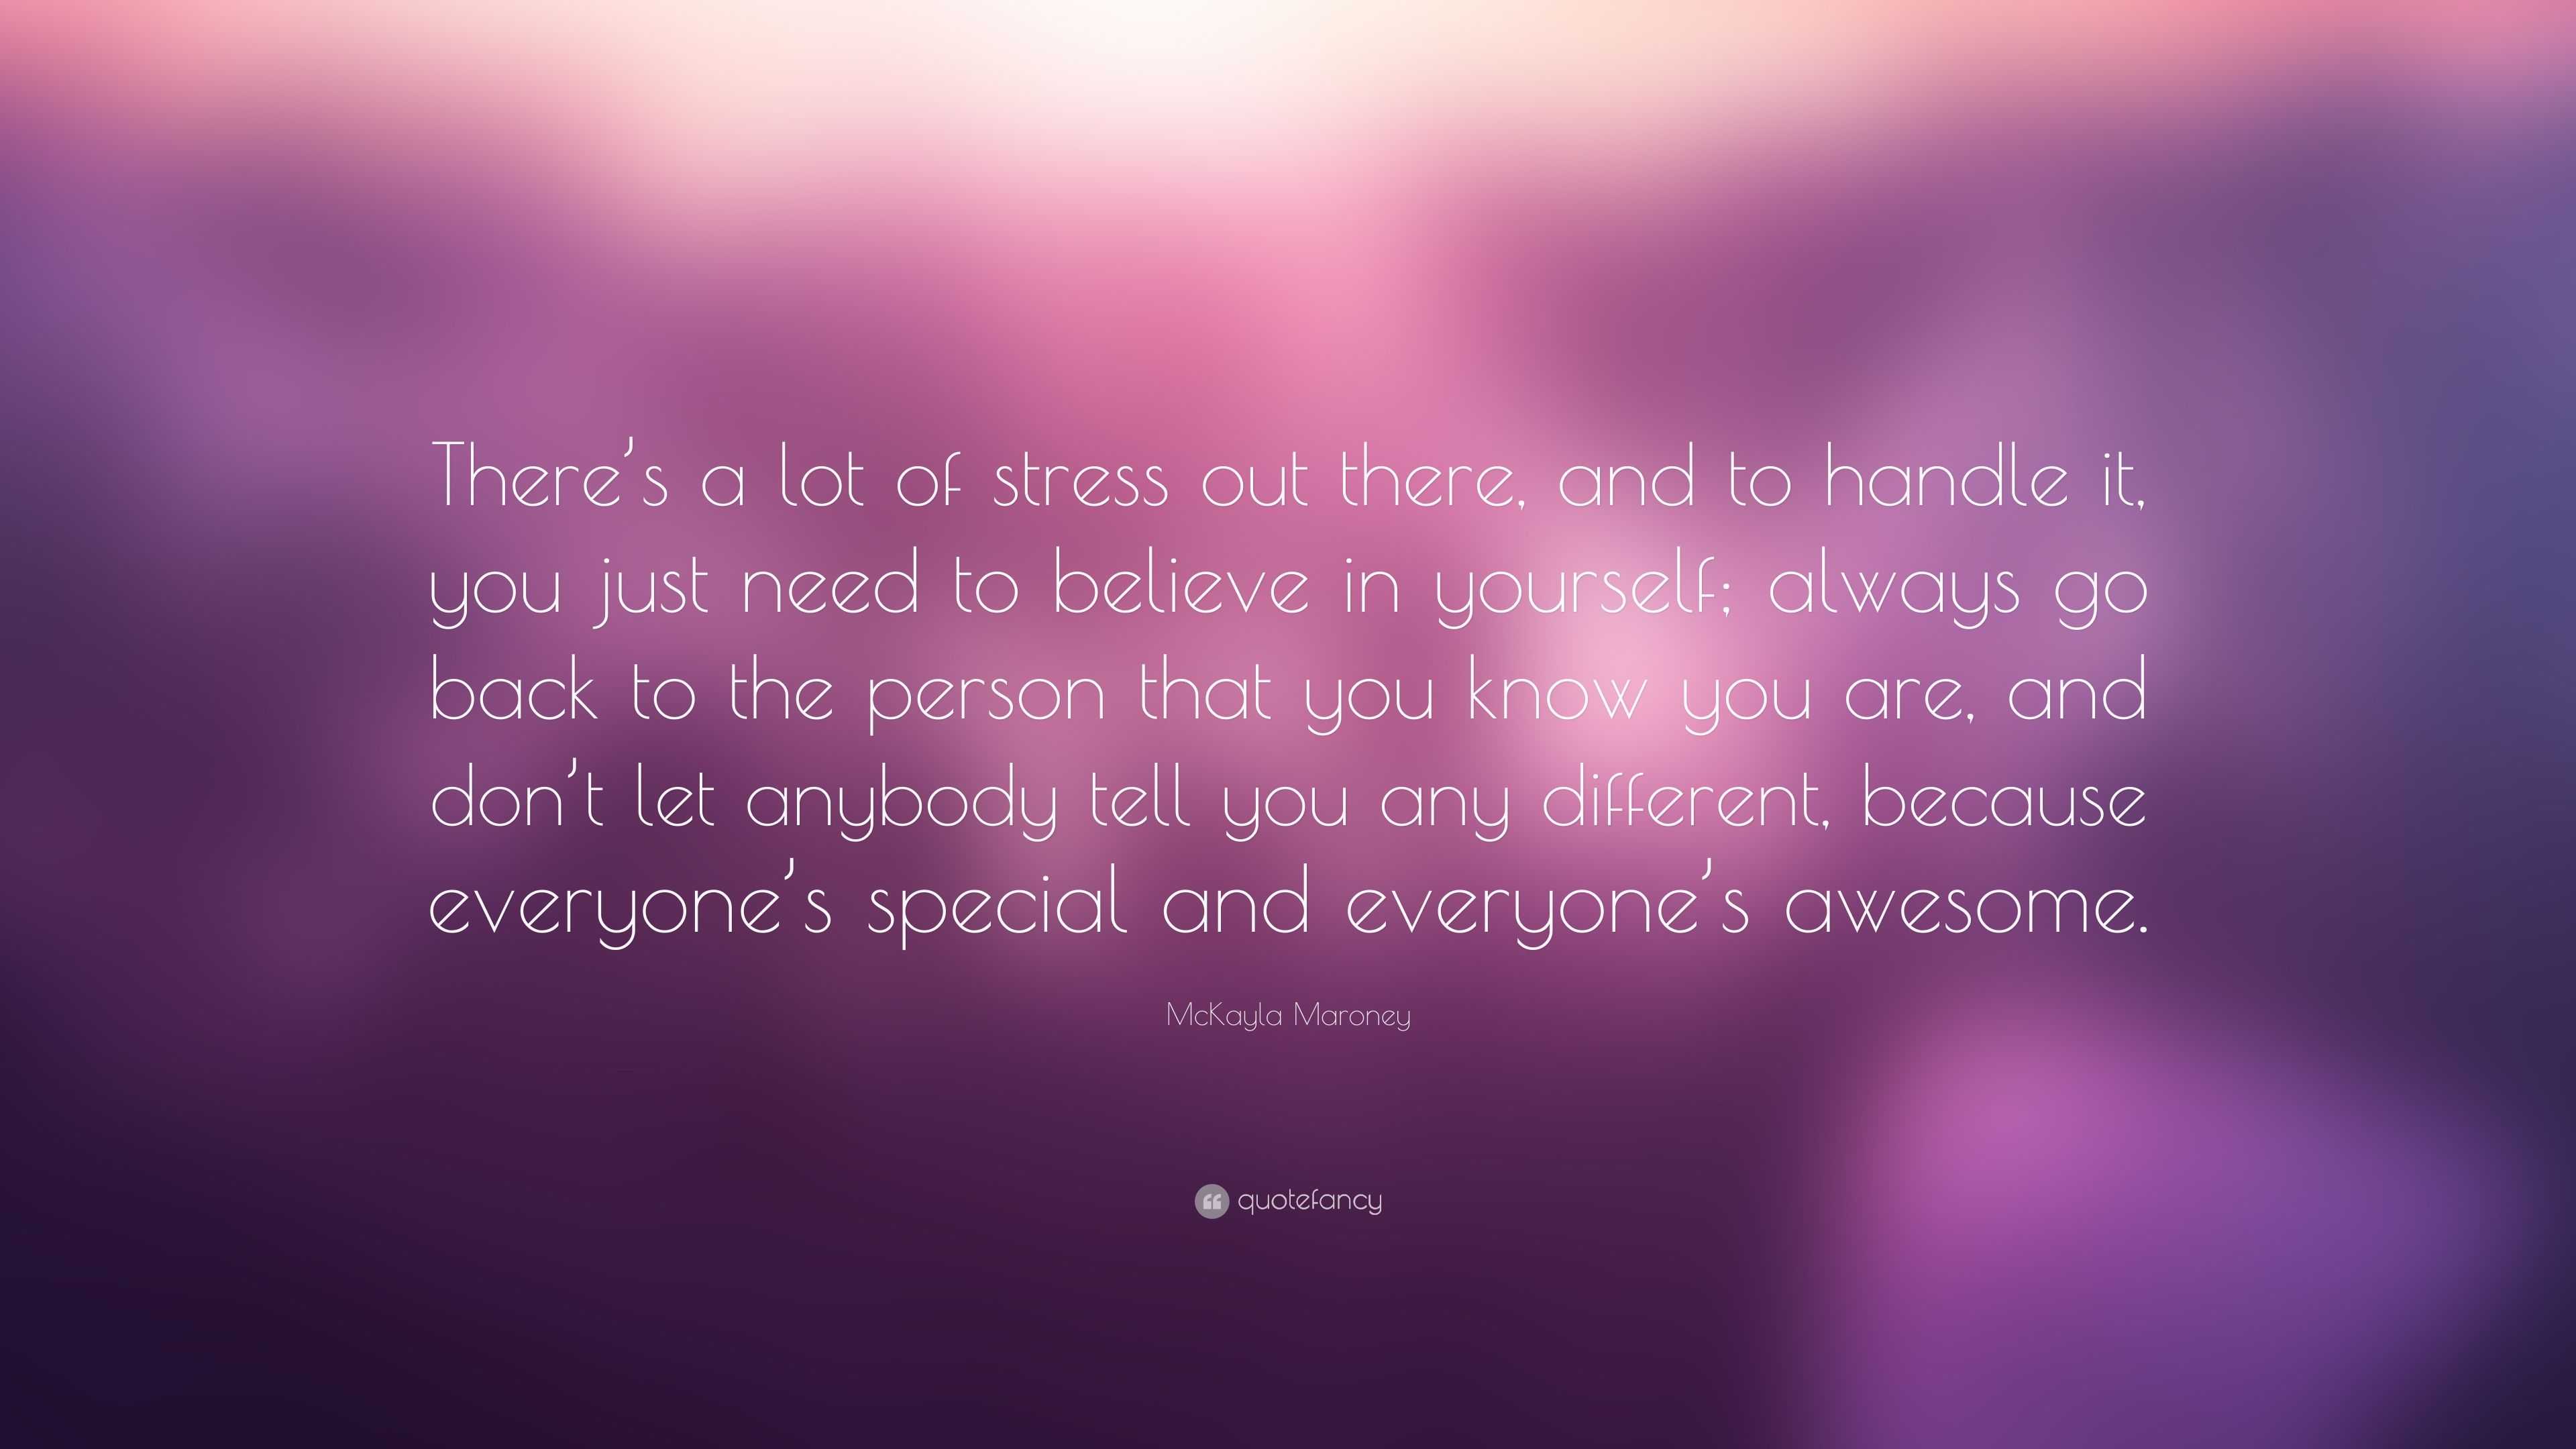 McKayla Maroney Quote: “There’s a lot of stress out there, and to